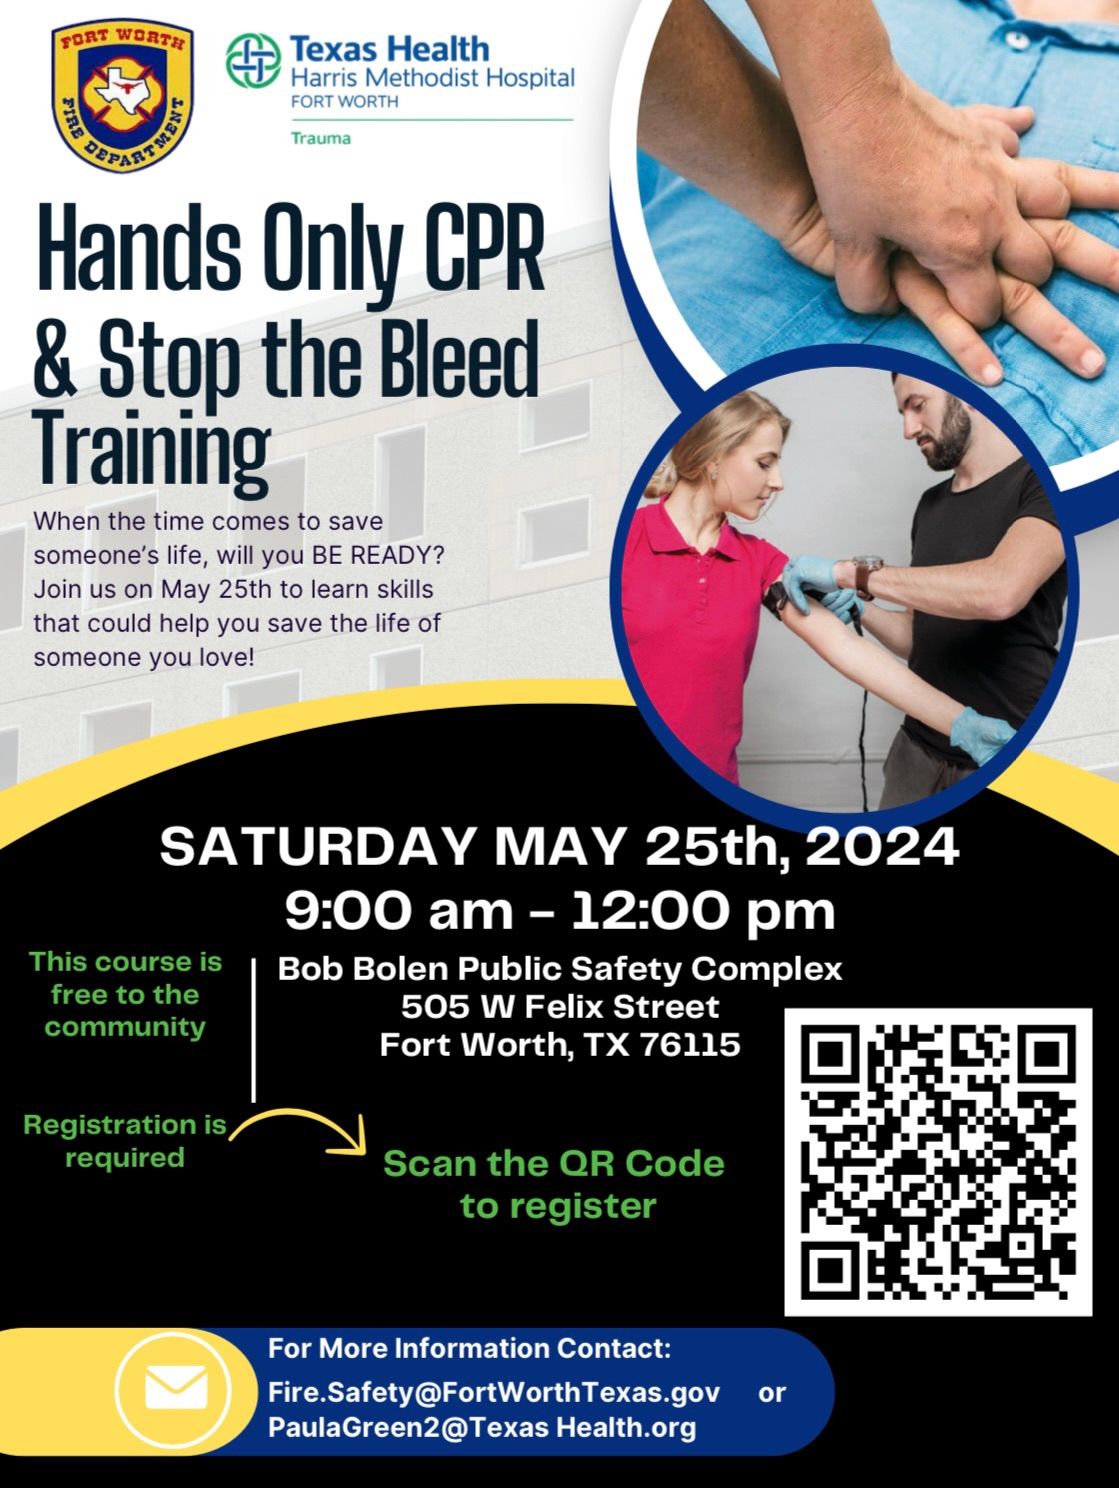 Hands Only CPR & Stop the Bleed Training